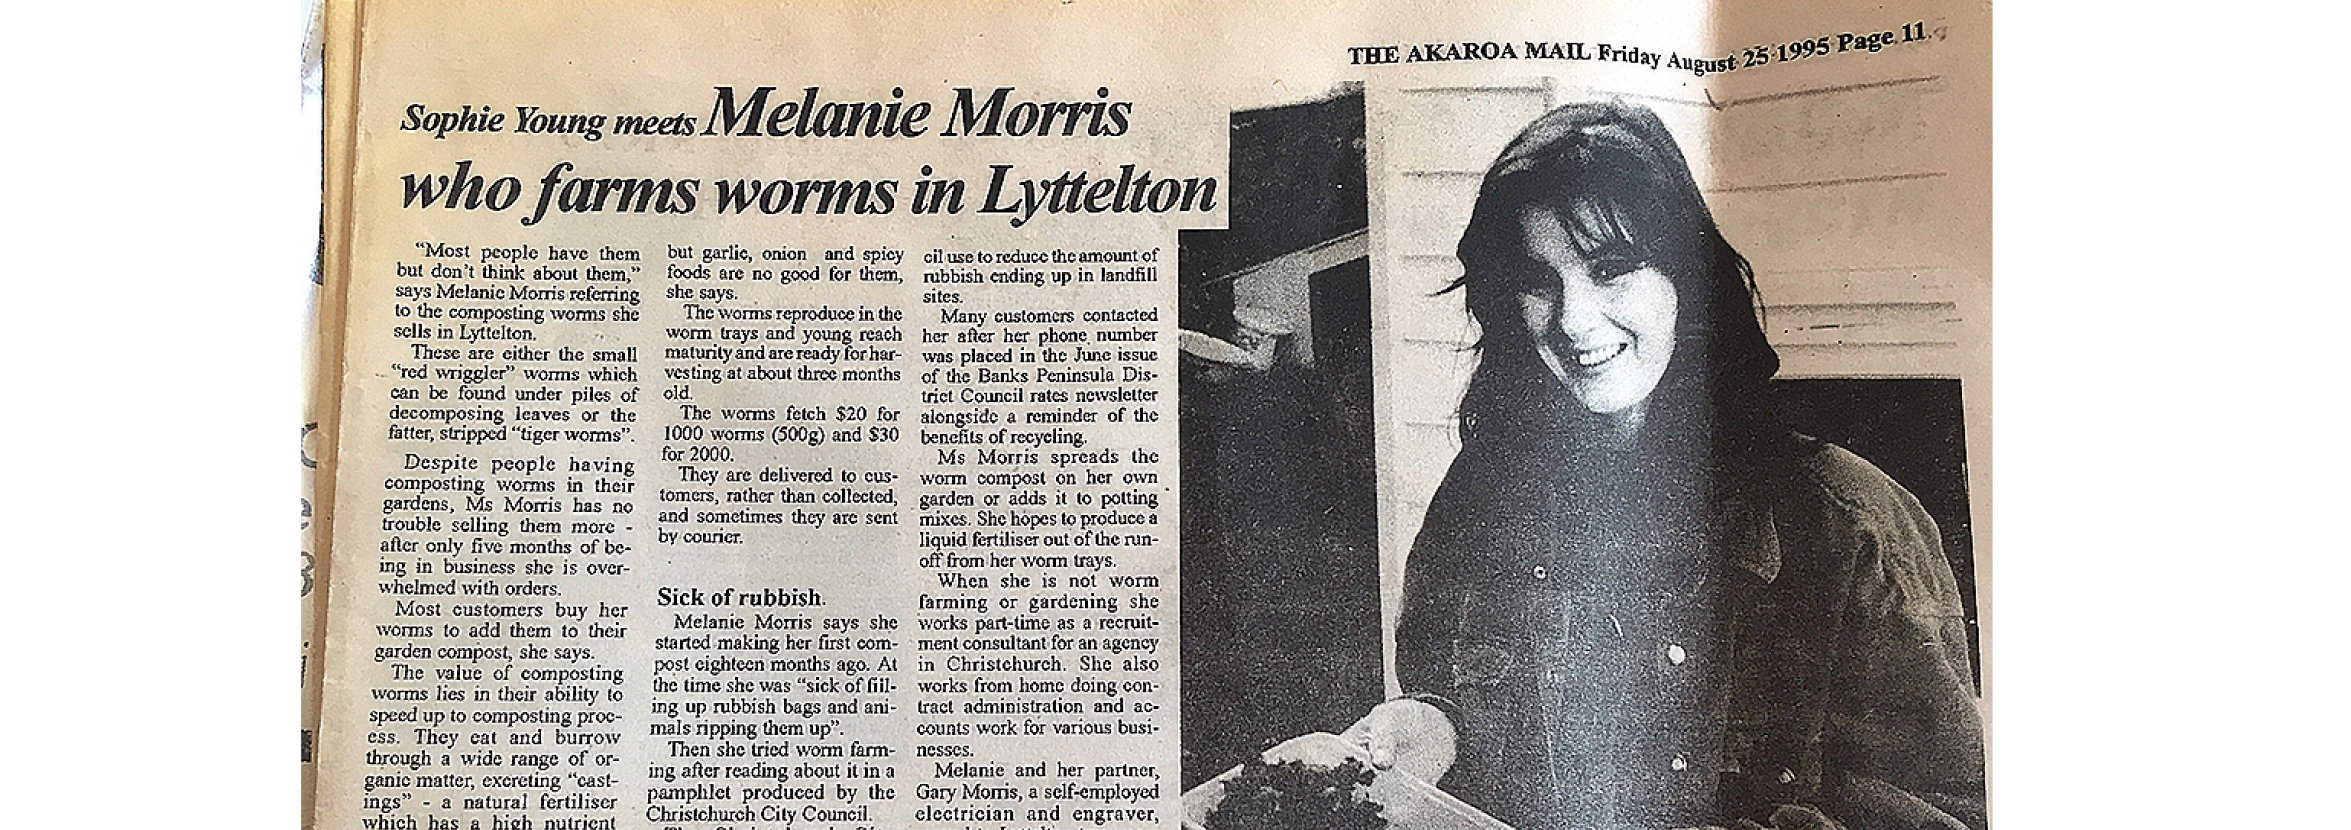 Melanie features in a newspaper article from Friday 25th August 1995, about starting a worm farm in Lyttelton.